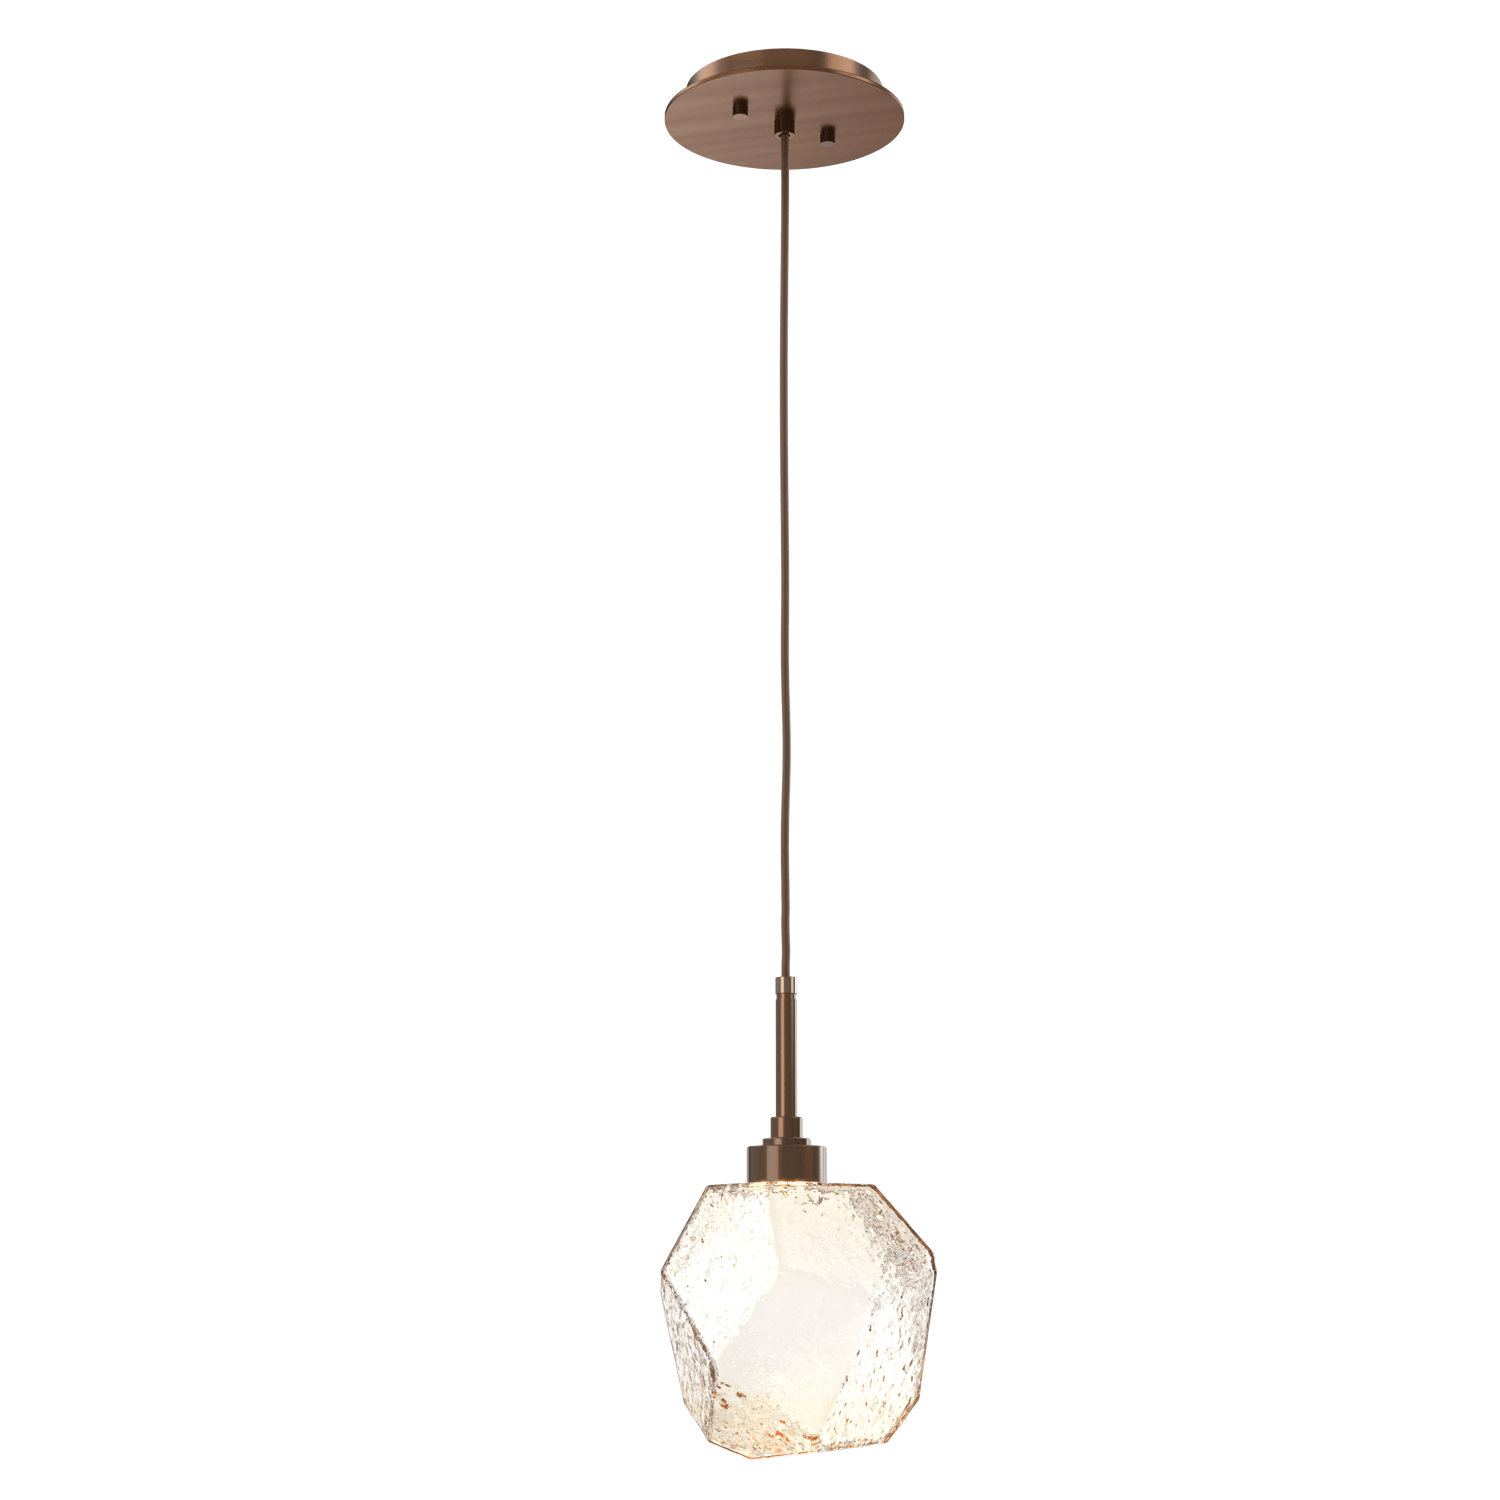 LAB0039-01-RB-A-Hammerton-Studio-Gem-pendant-light-with-oil-rubbed-bronze-finish-and-amber-blown-glass-shades-and-LED-lamping